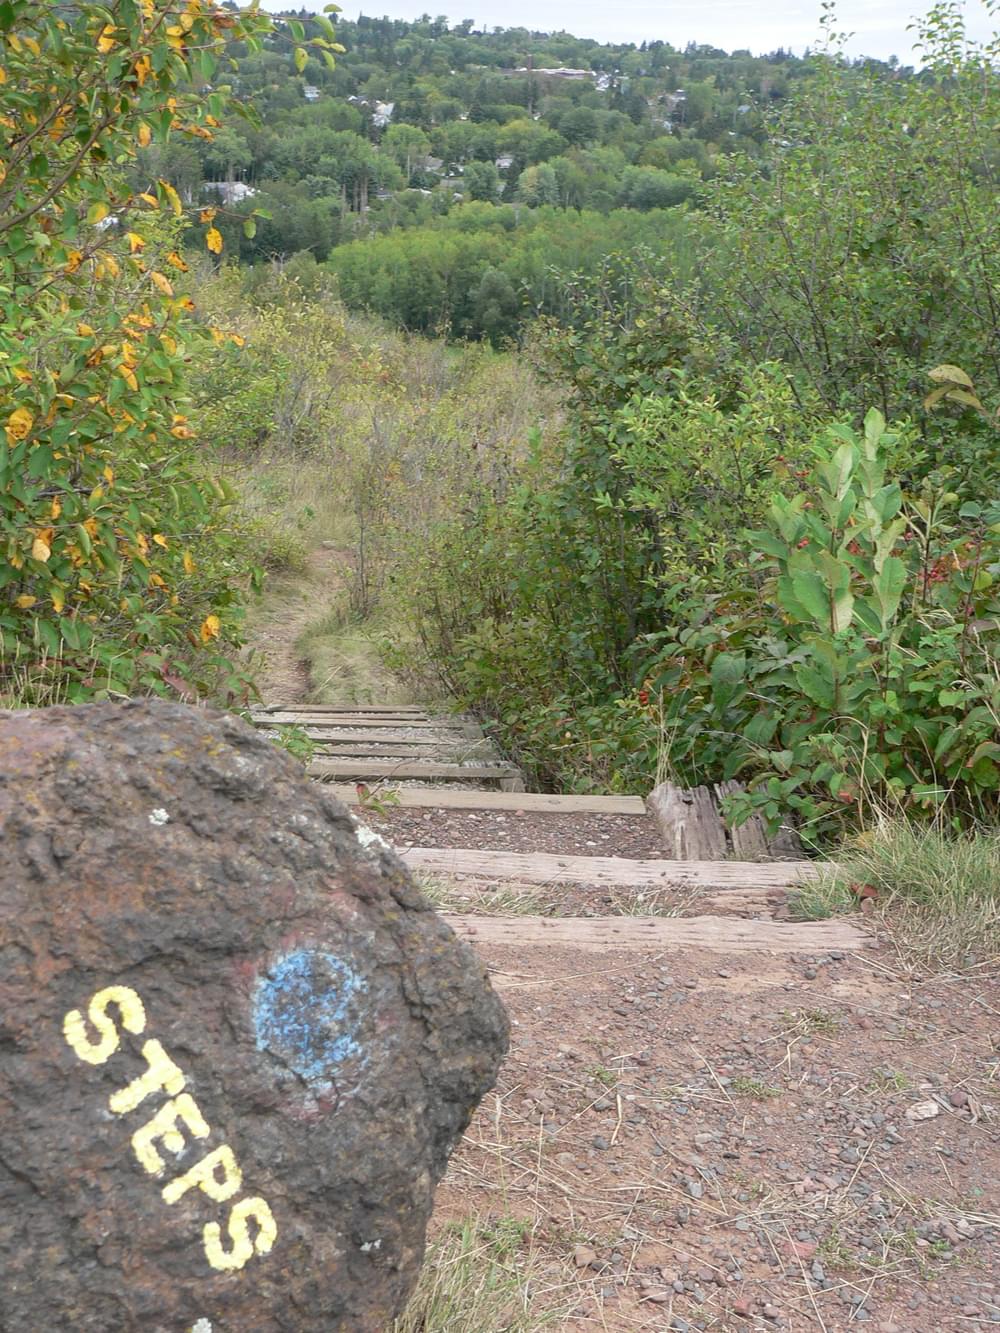 Rock sign warns hikers that trail drops off; Superior Hiking Trail, Duluth, Minnesota